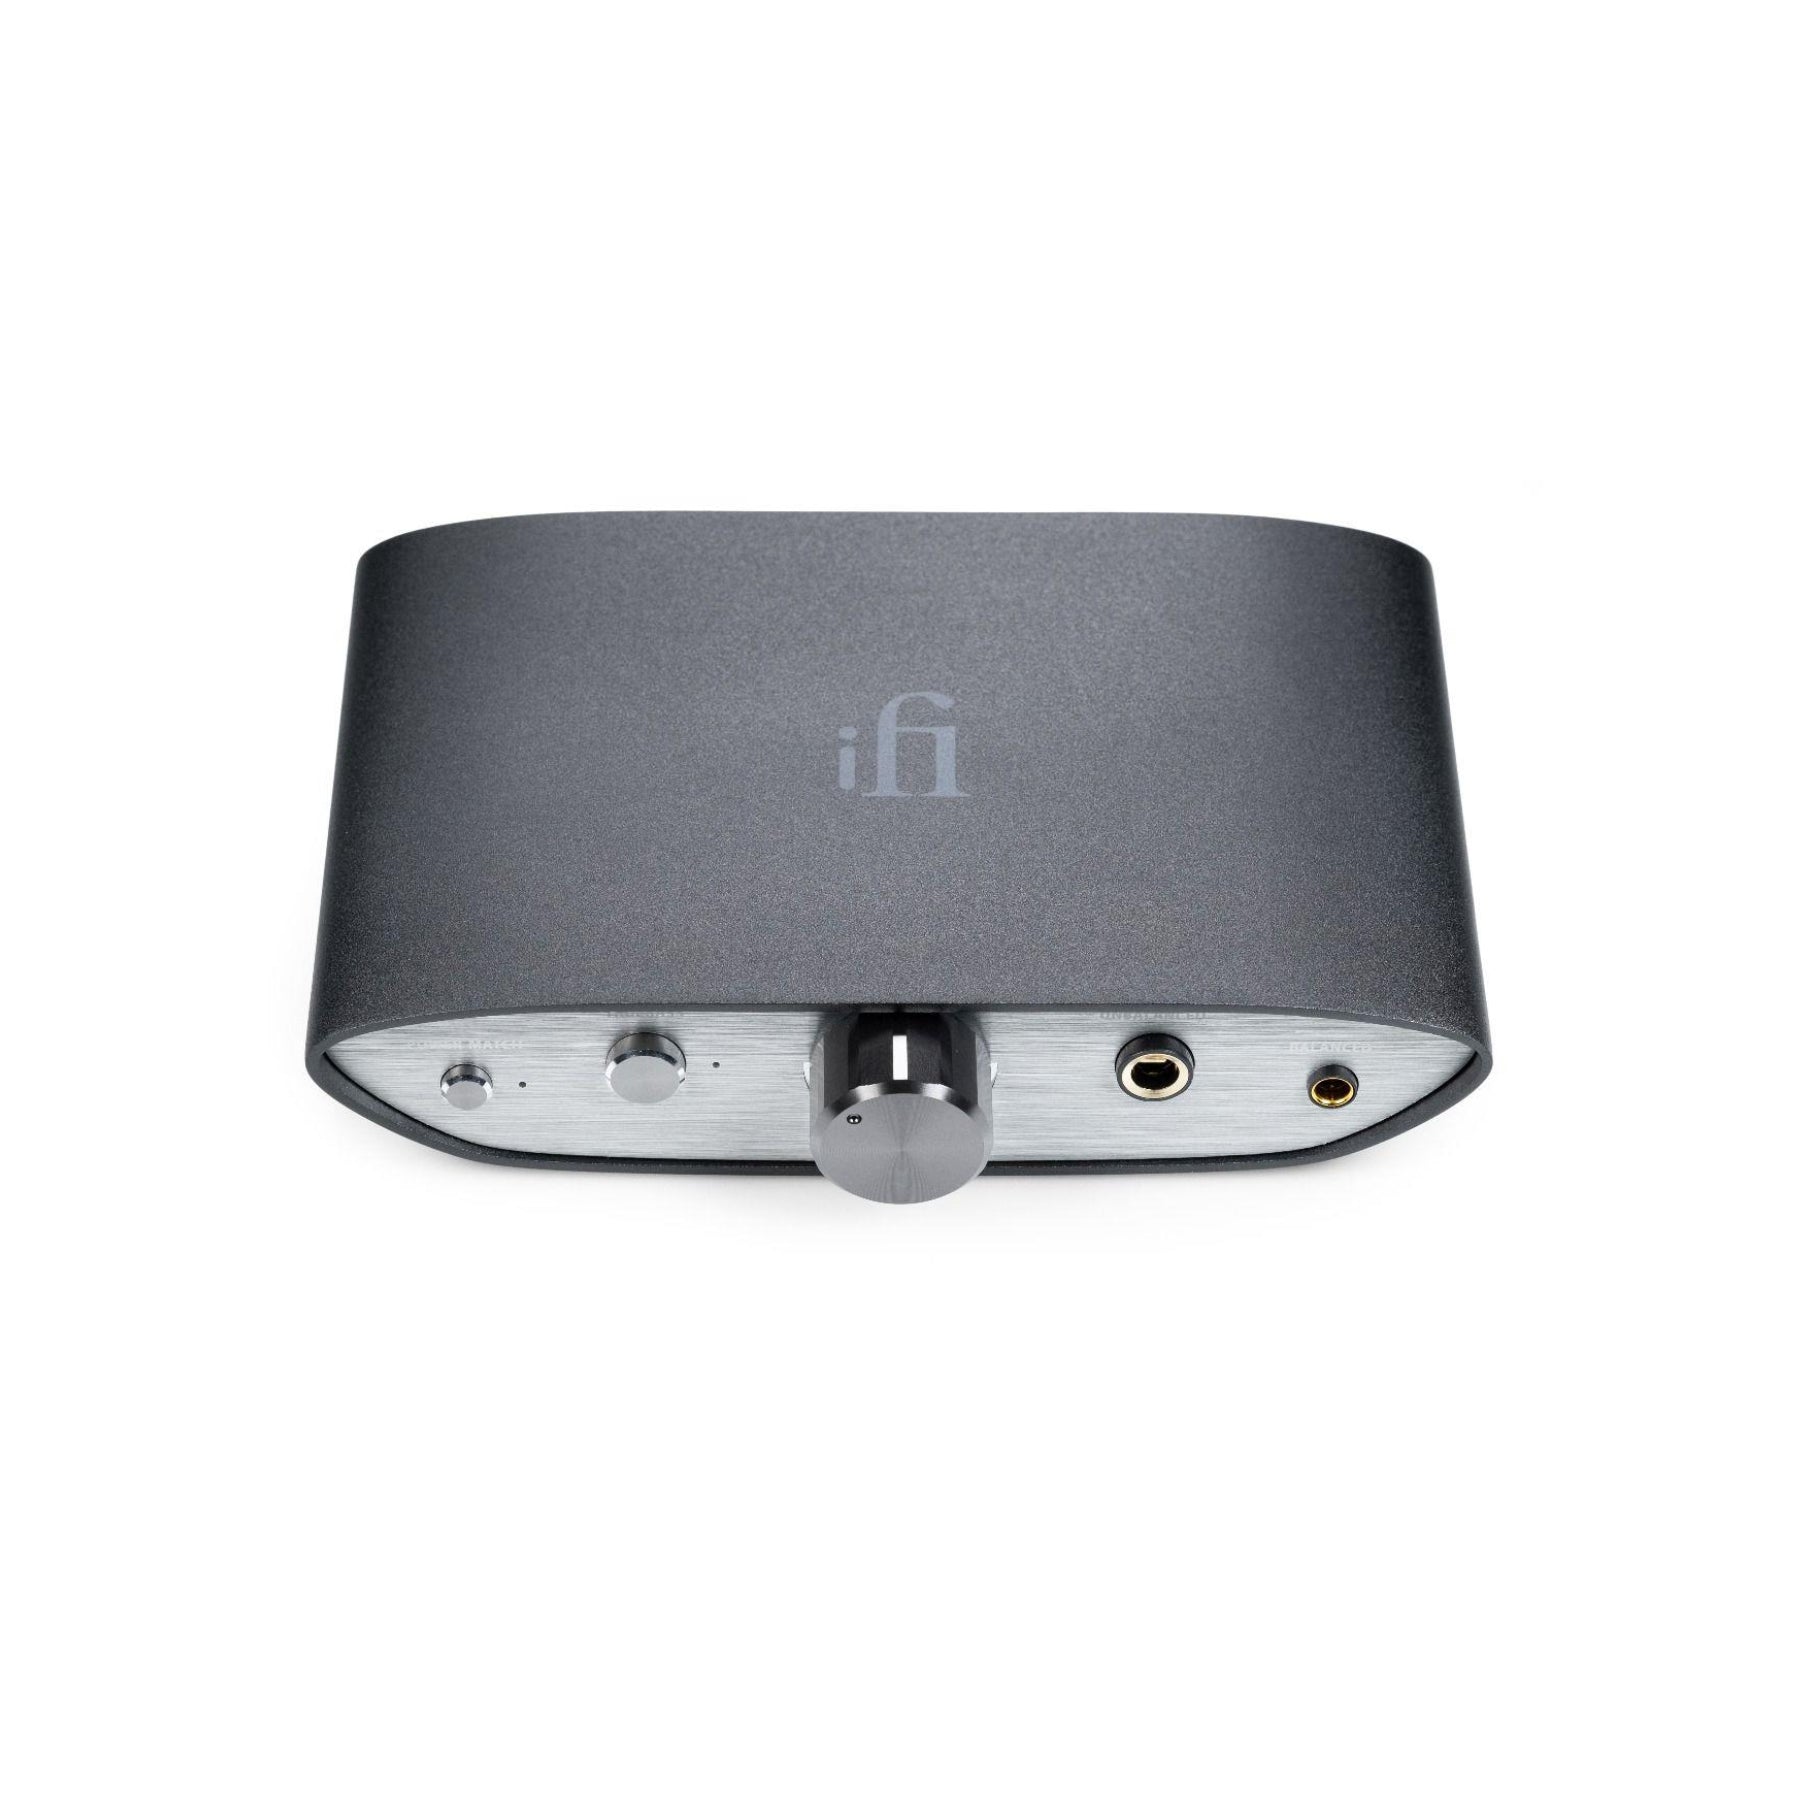 What is a DAC and what are its Benefits? - iFi audio